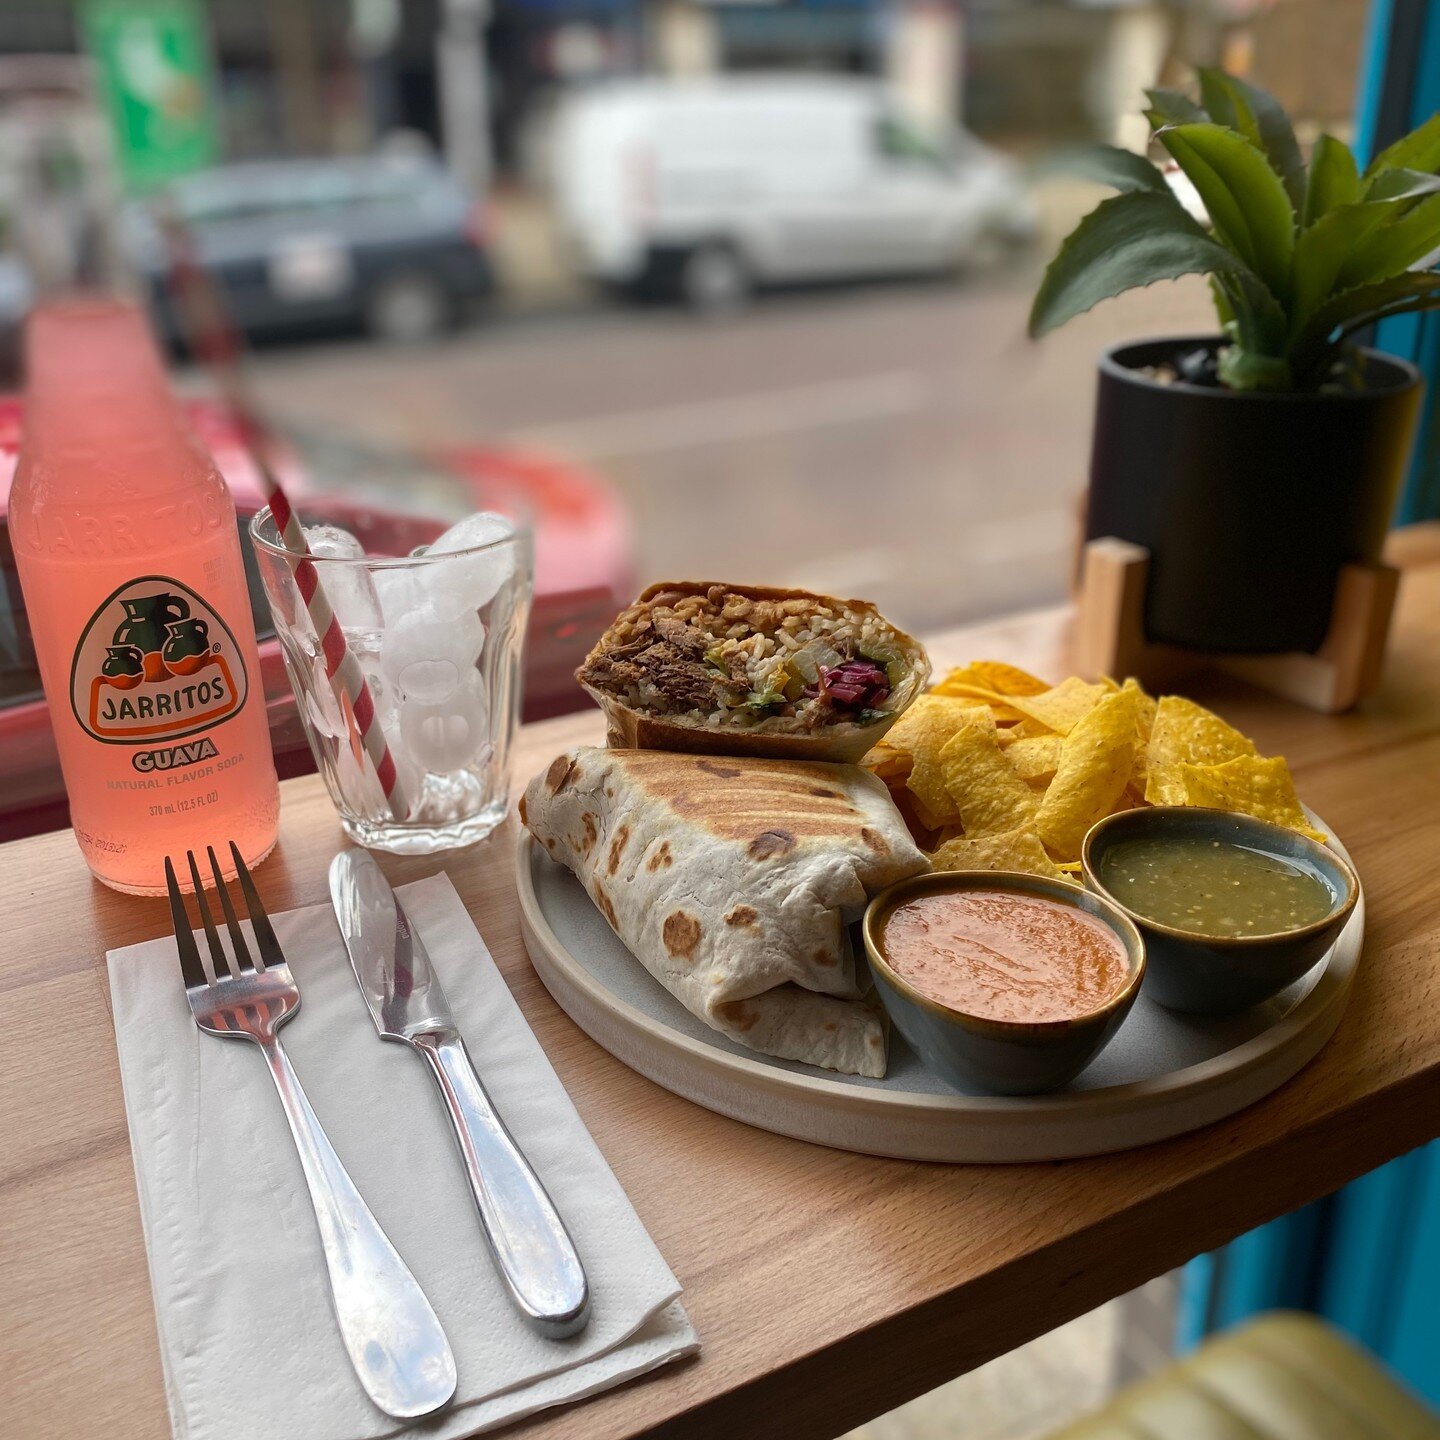 Spice up your life! 🌶 Our burritos, tacos and power bowls are fresh and packed with plenty of flavour&hellip; but fancy something with an extra kick? Try our Fiery Diabla Salsa, only for the brave! 🥵